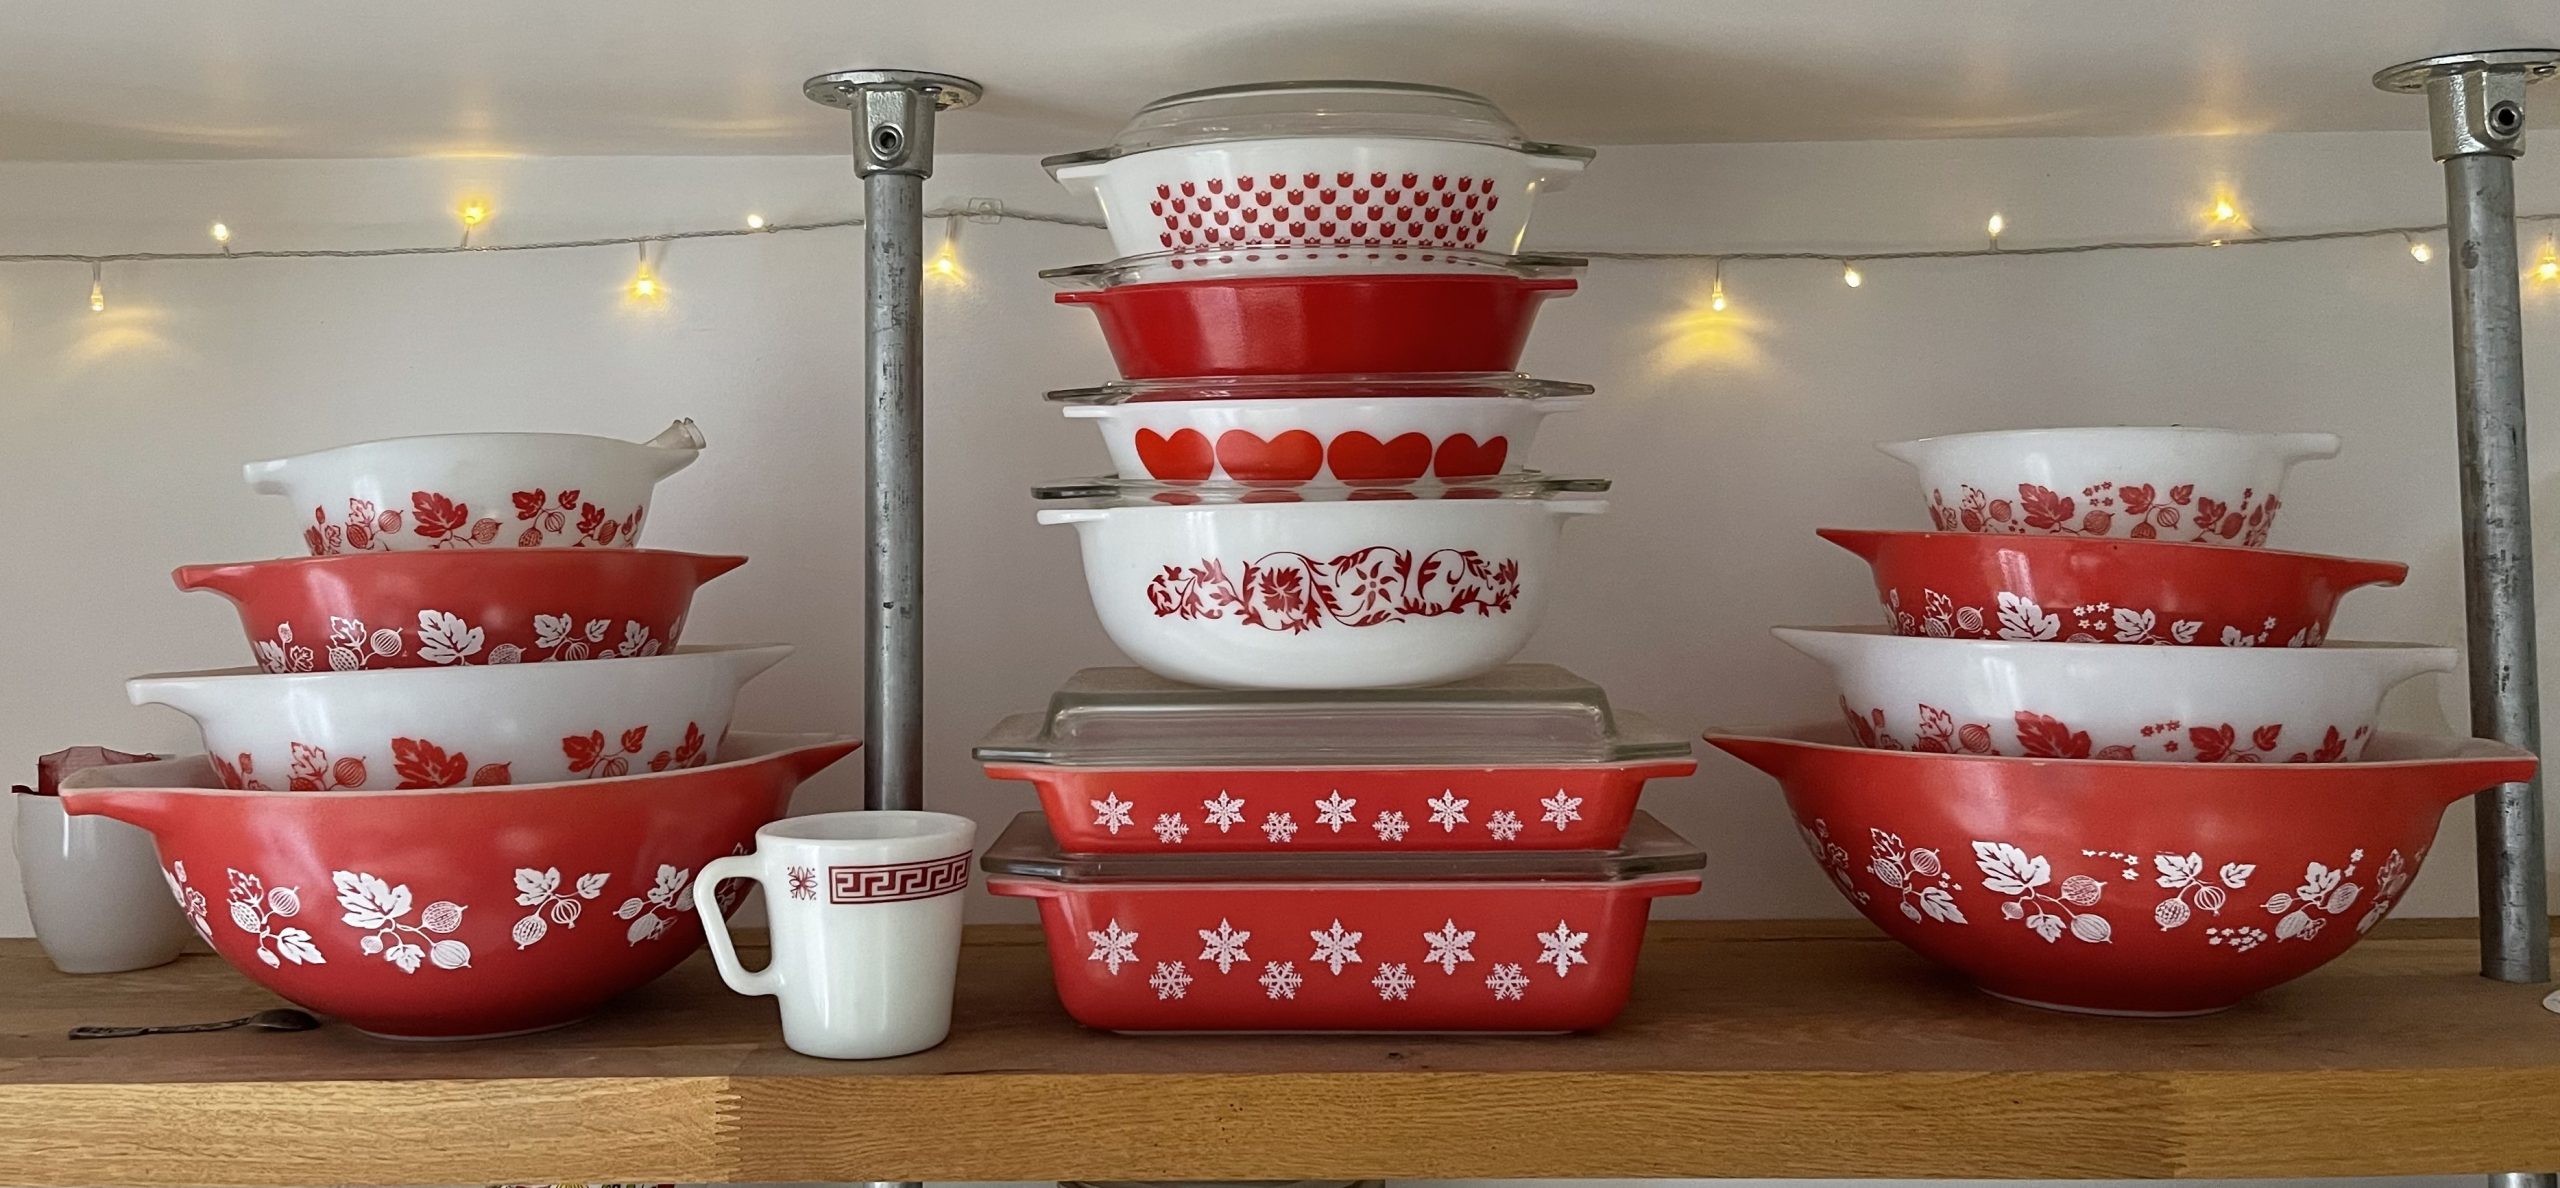 Mix and Match Pyrex sets in red and white. Patterns include Gooseberry. Greek Key, Gaiety Snowflake, Dianthus Folly and Red Hearts. Logo